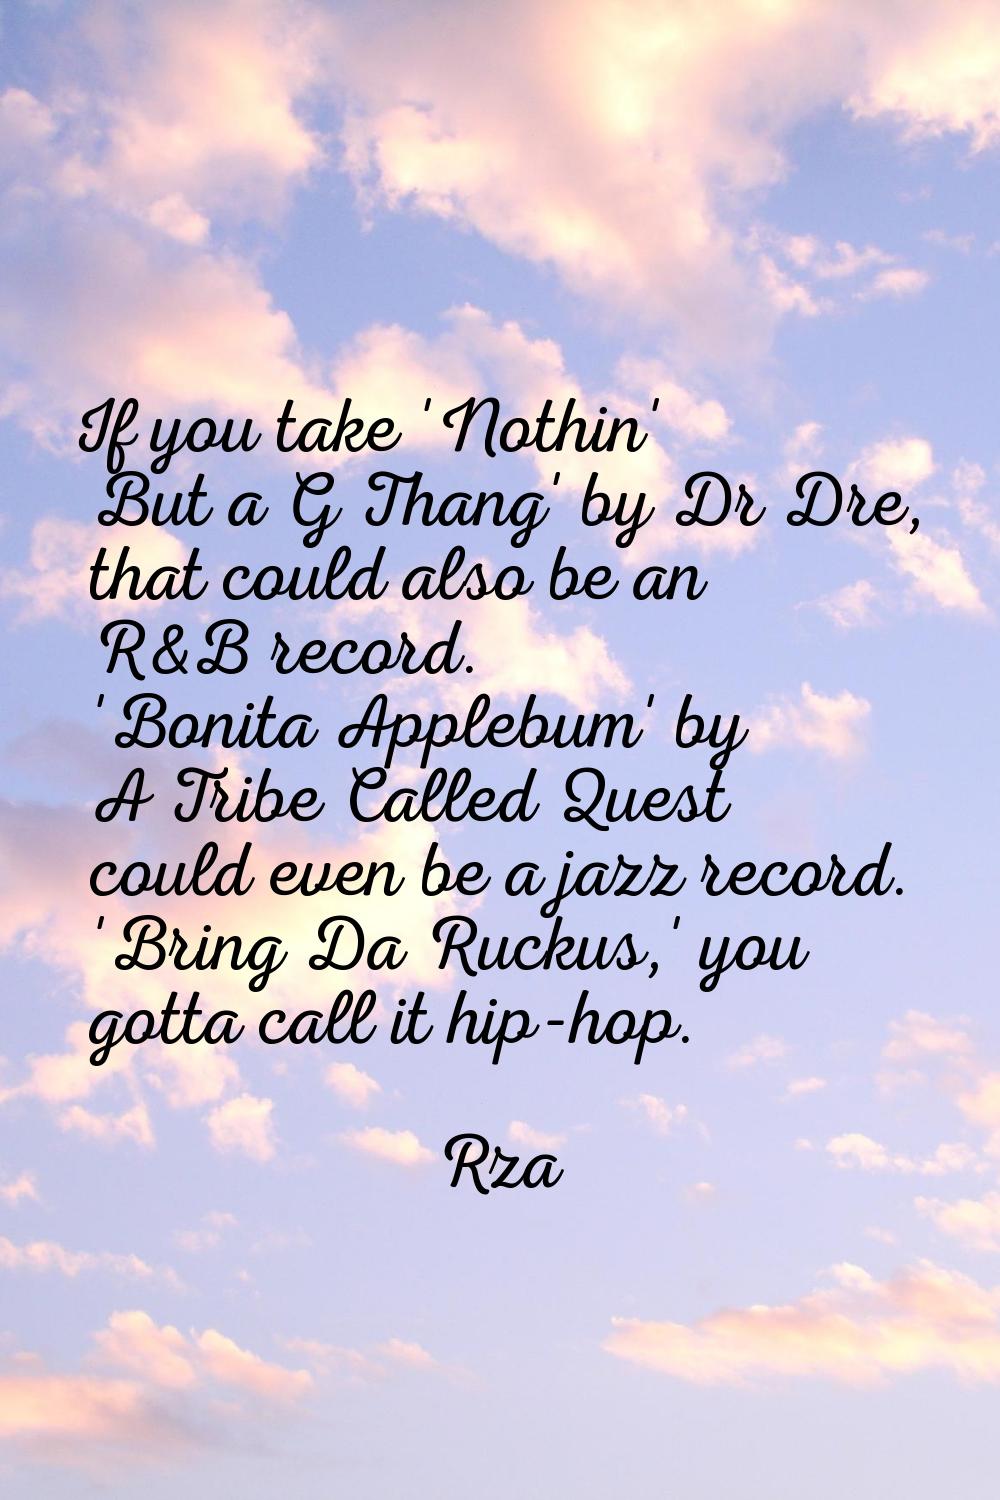 If you take 'Nothin' But a G Thang' by Dr Dre, that could also be an R&B record. 'Bonita Applebum' 